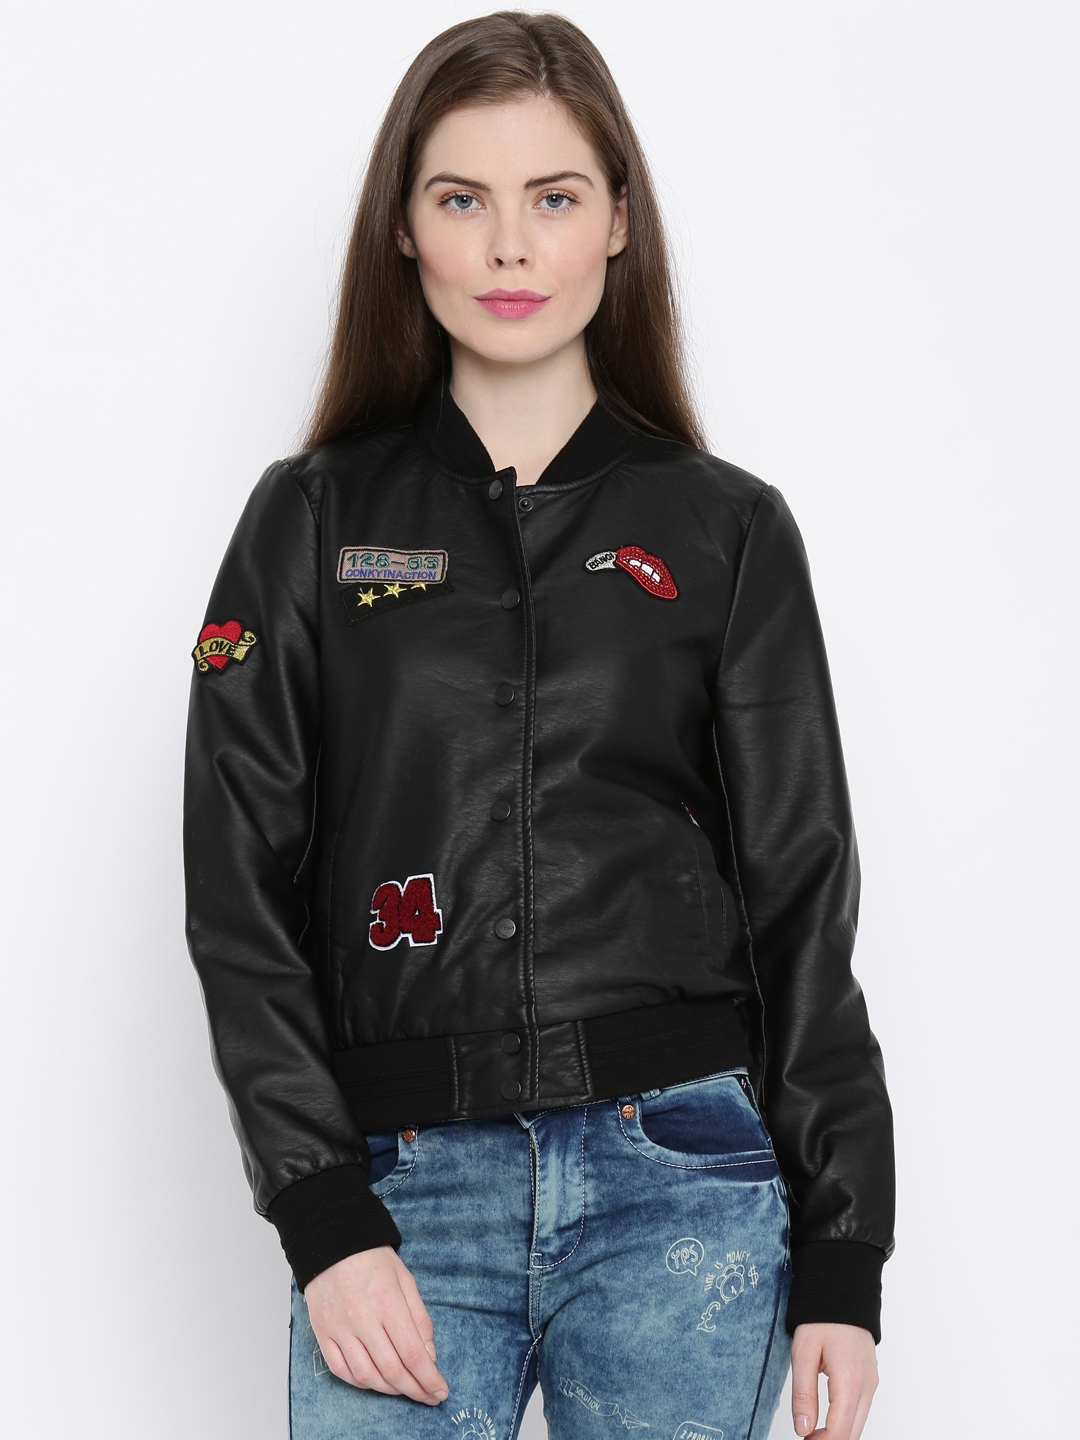 Buy ONLY Black Applique Bomber Jacket - Jackets for Women 1601713 | Myntra